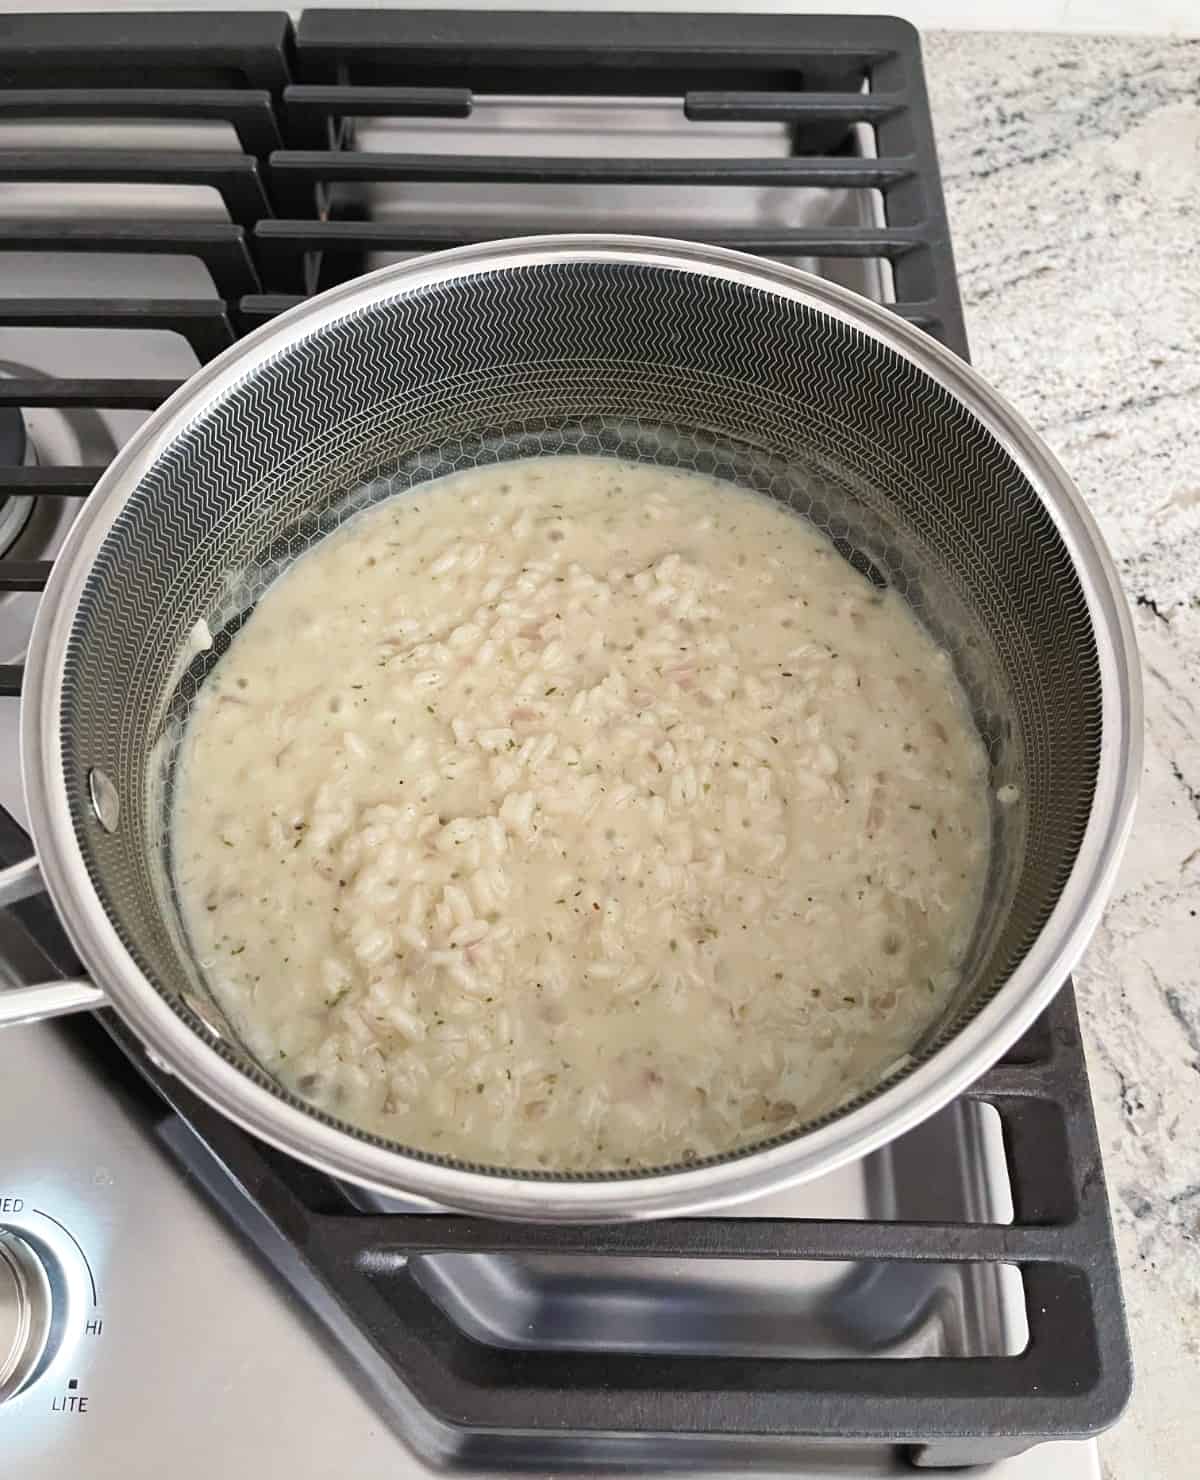 Cooking creamy parmesan risotto package mix in saucepan on stovetop.